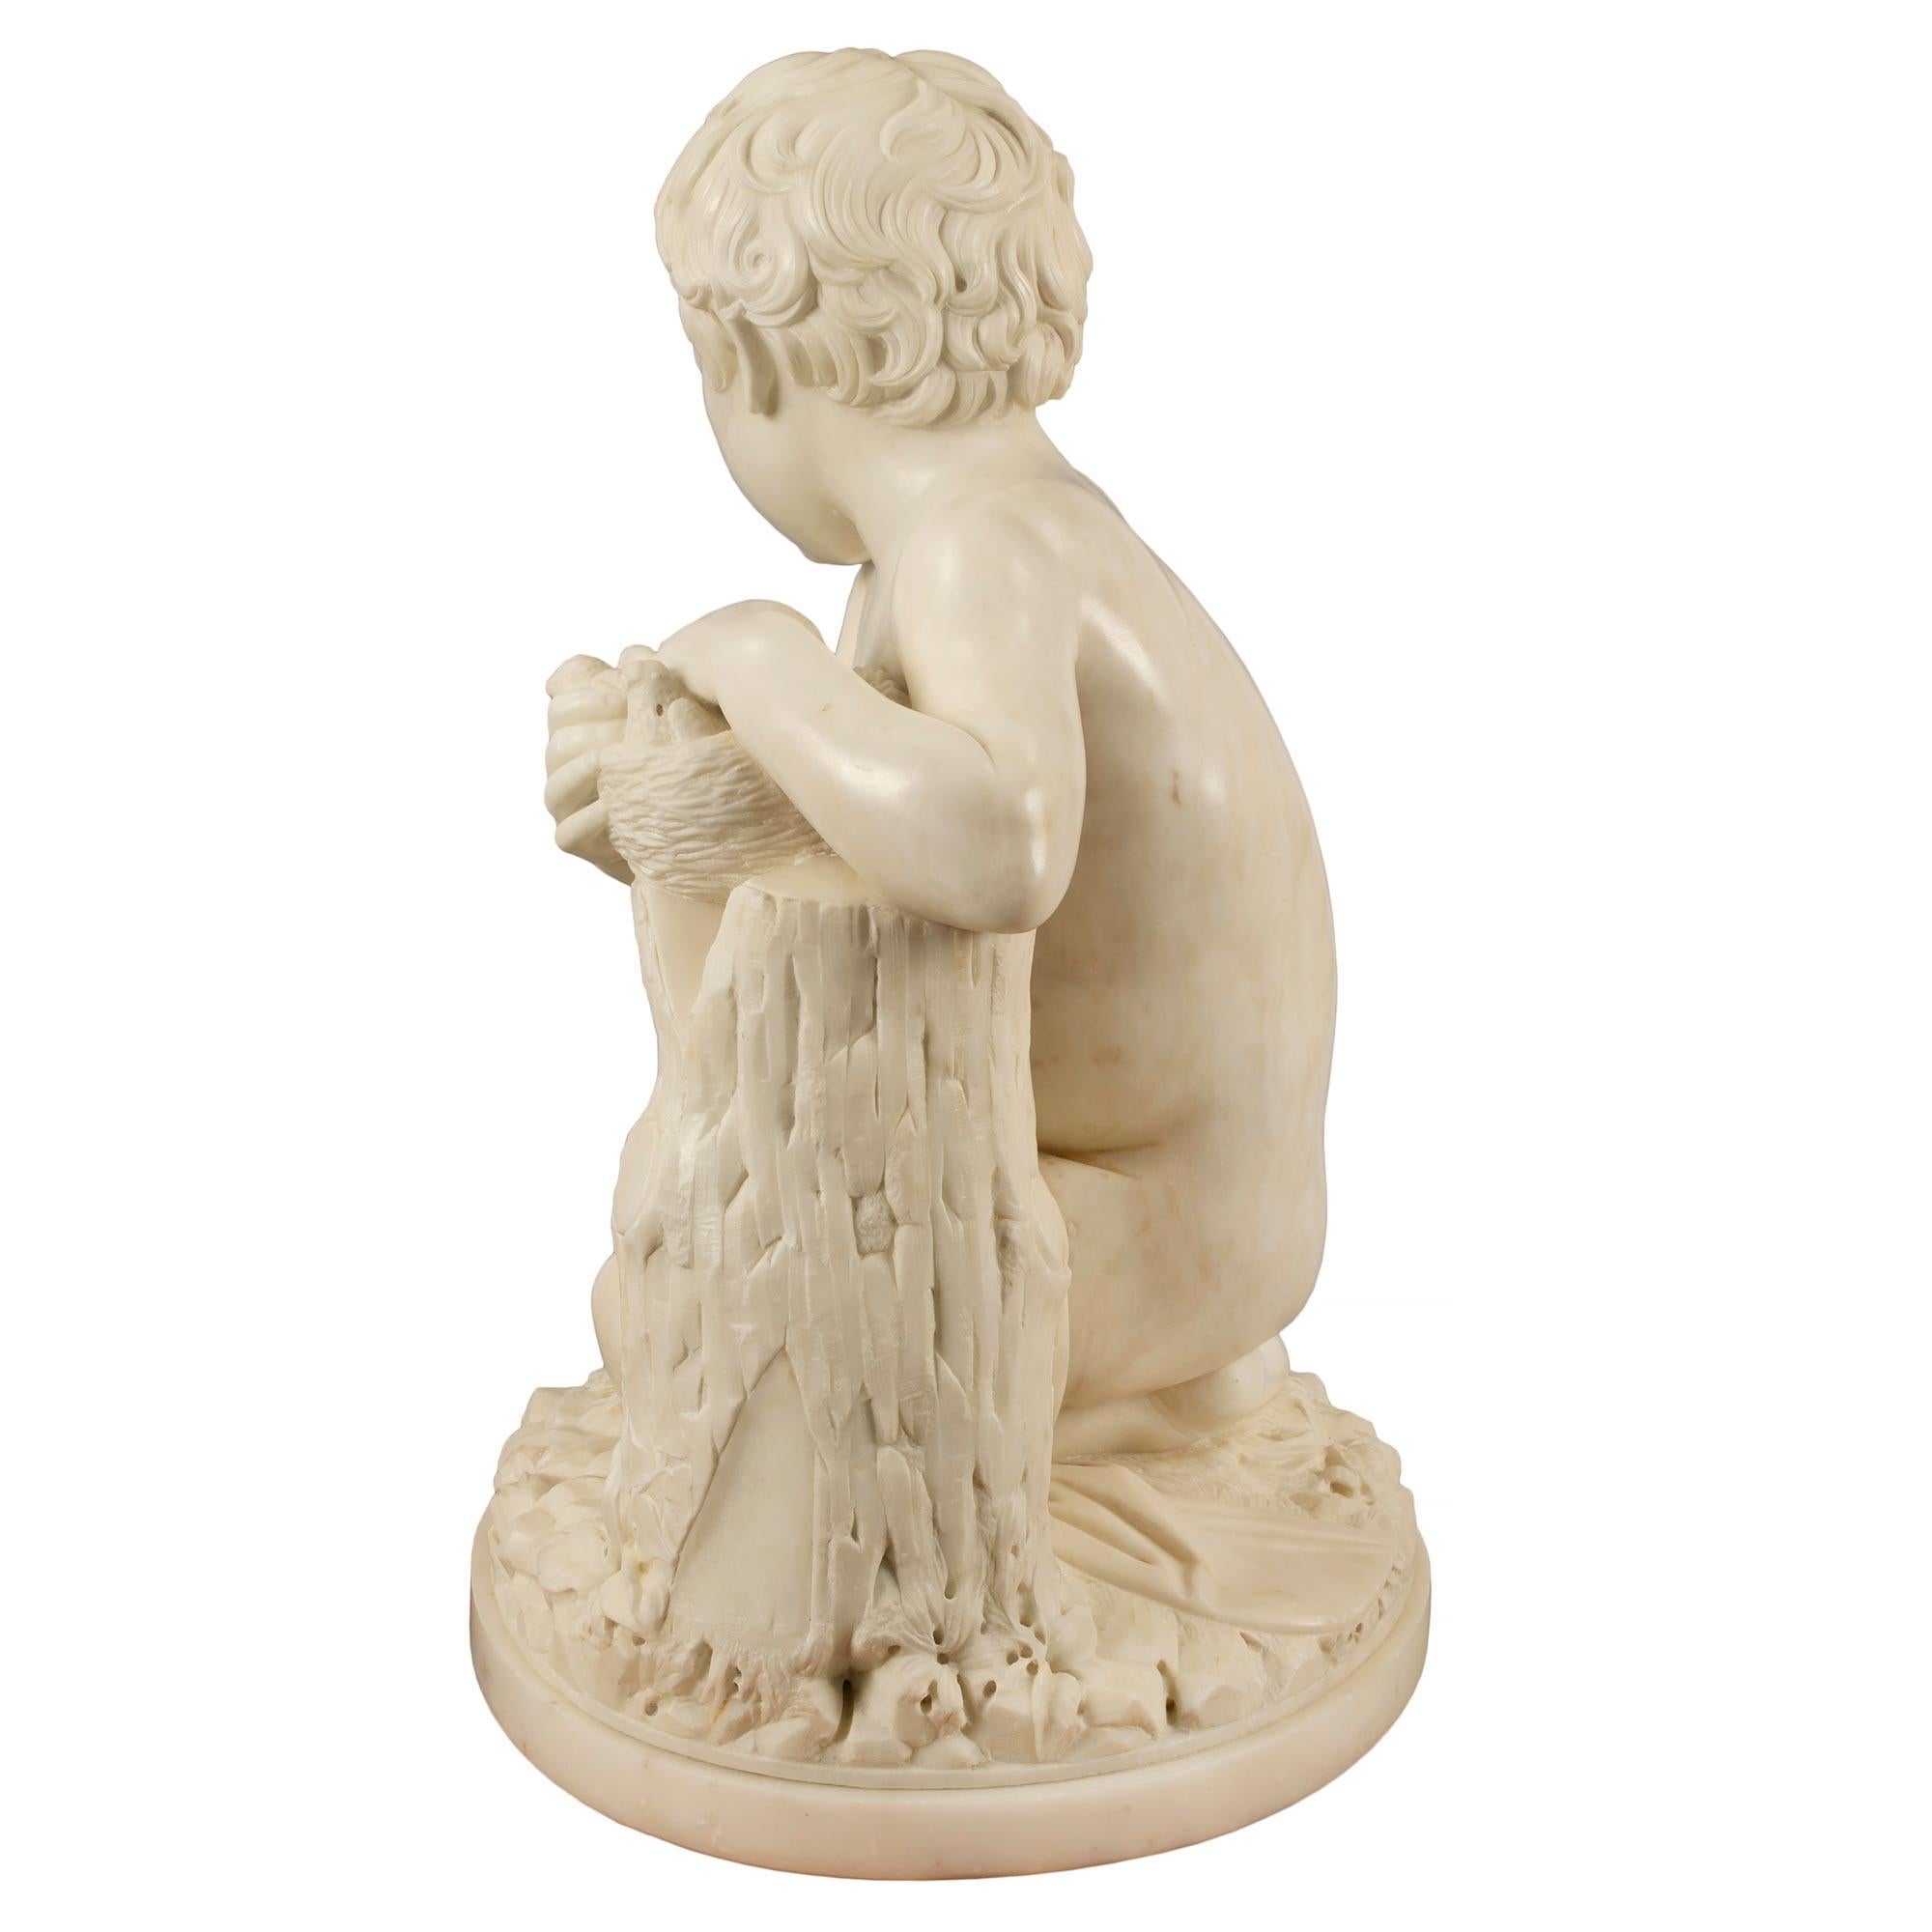 Italian 19th Century White Carrara Marble Signed Statue of a Young Boy For Sale 2